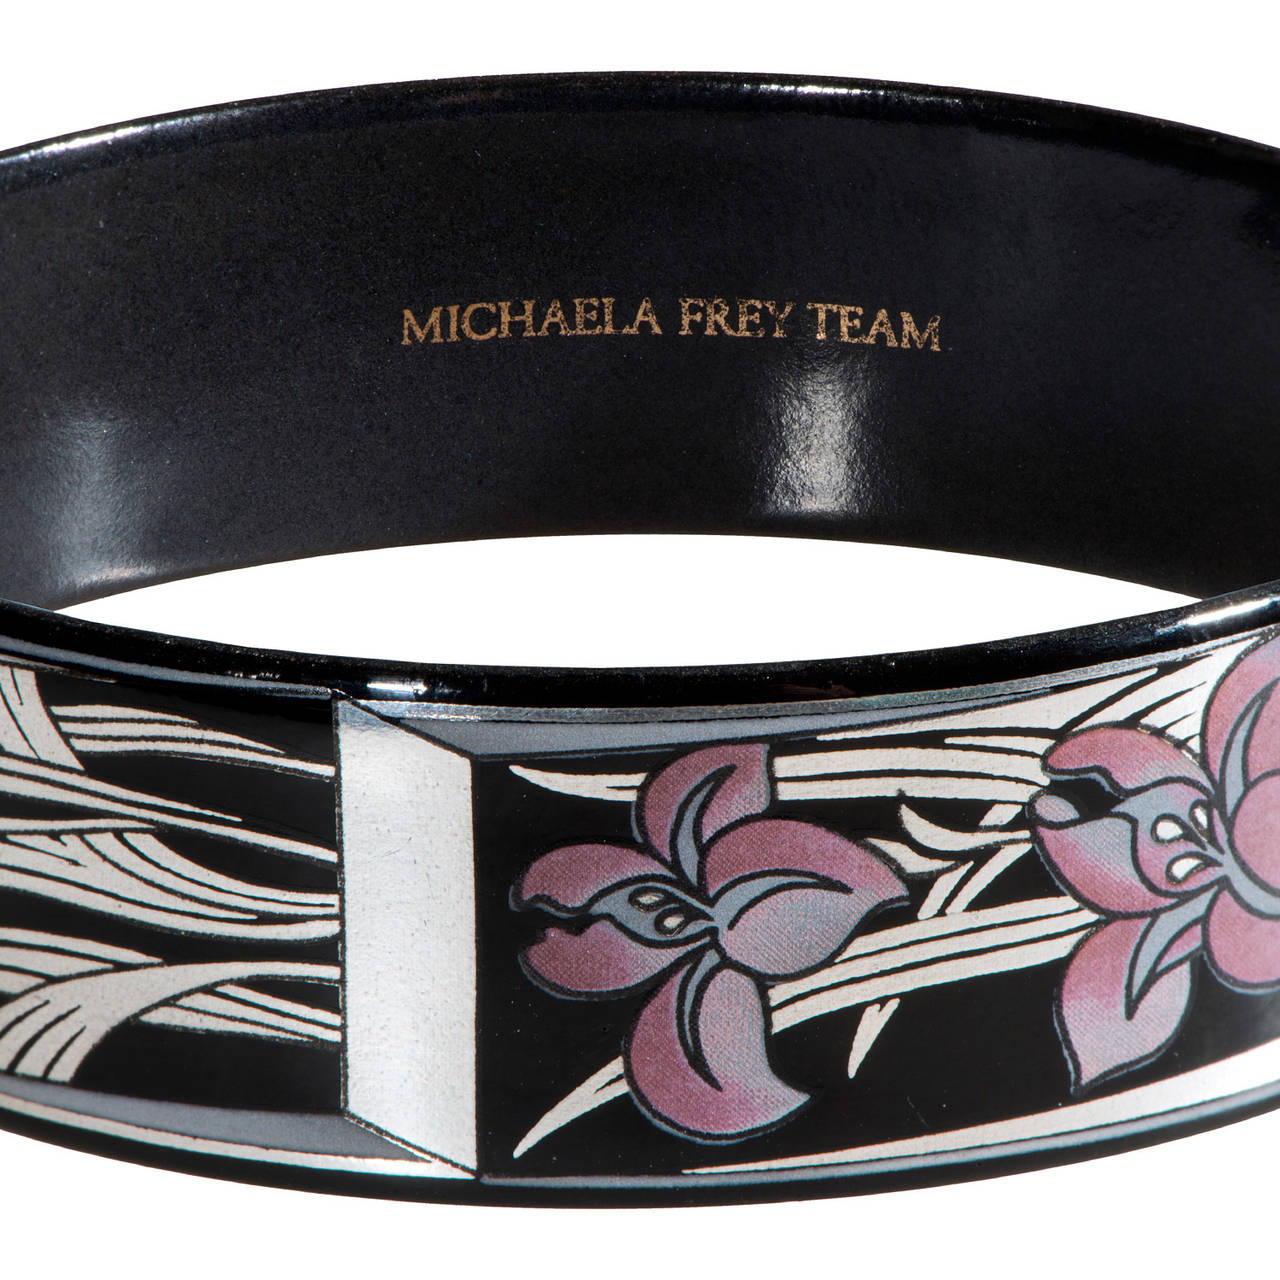 Michaela Frey opened her workshop in Vienna, Austria in 1951, making the most exquisite fashion jewellery. She quickly became an important and noted designer and was asked to produce jewellery for Hermes, the French high fashion house. Frey died in